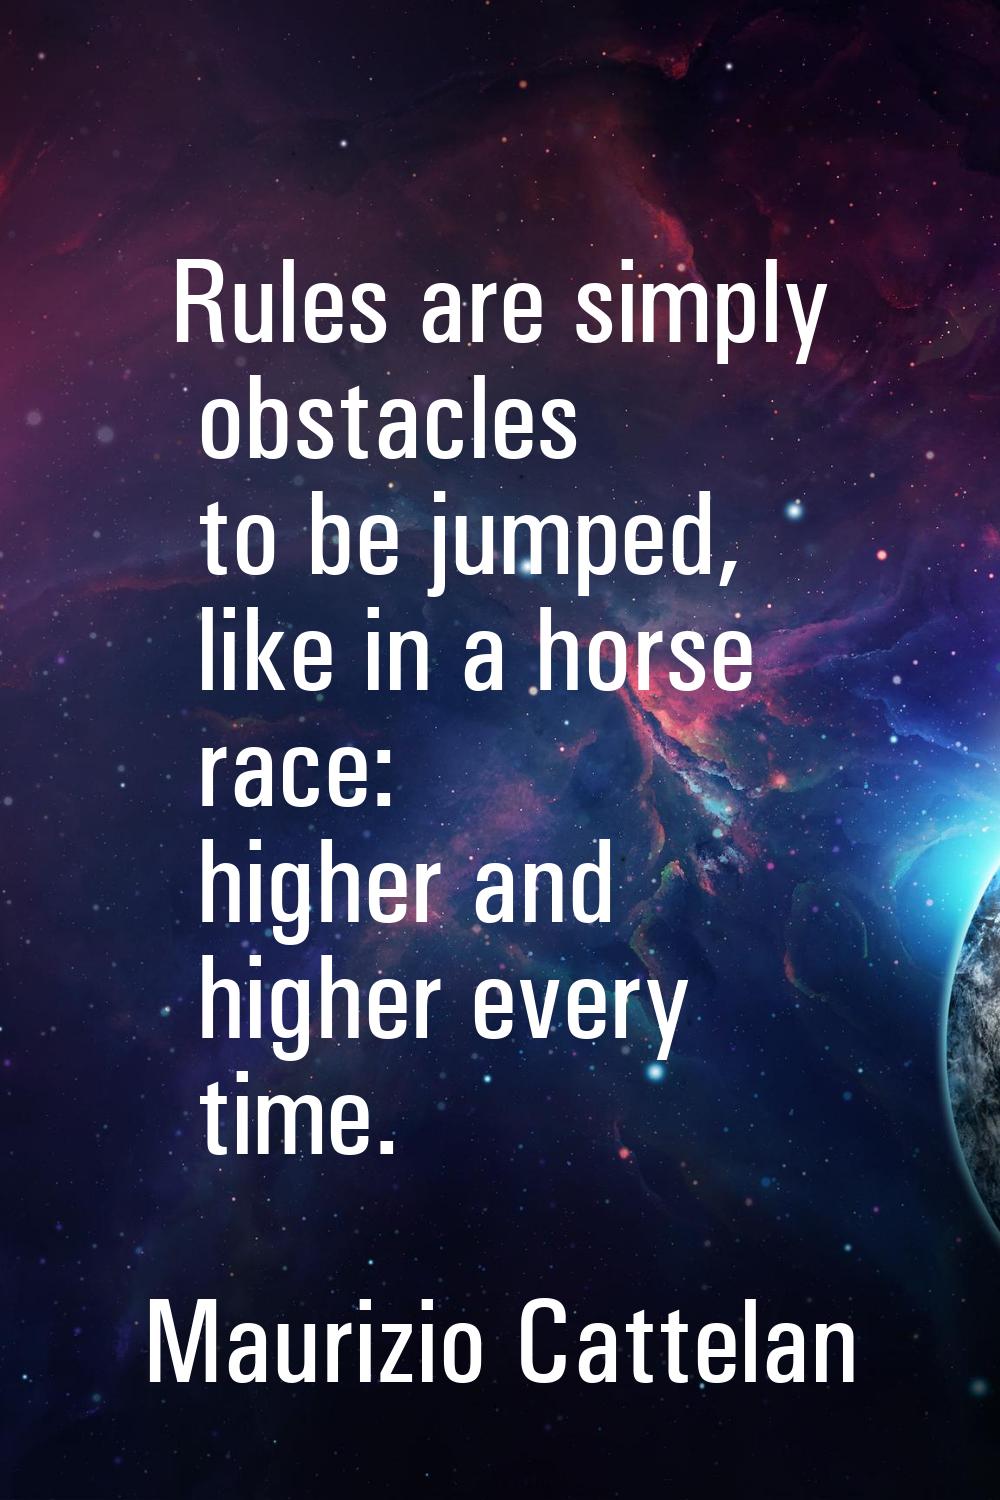 Rules are simply obstacles to be jumped, like in a horse race: higher and higher every time.